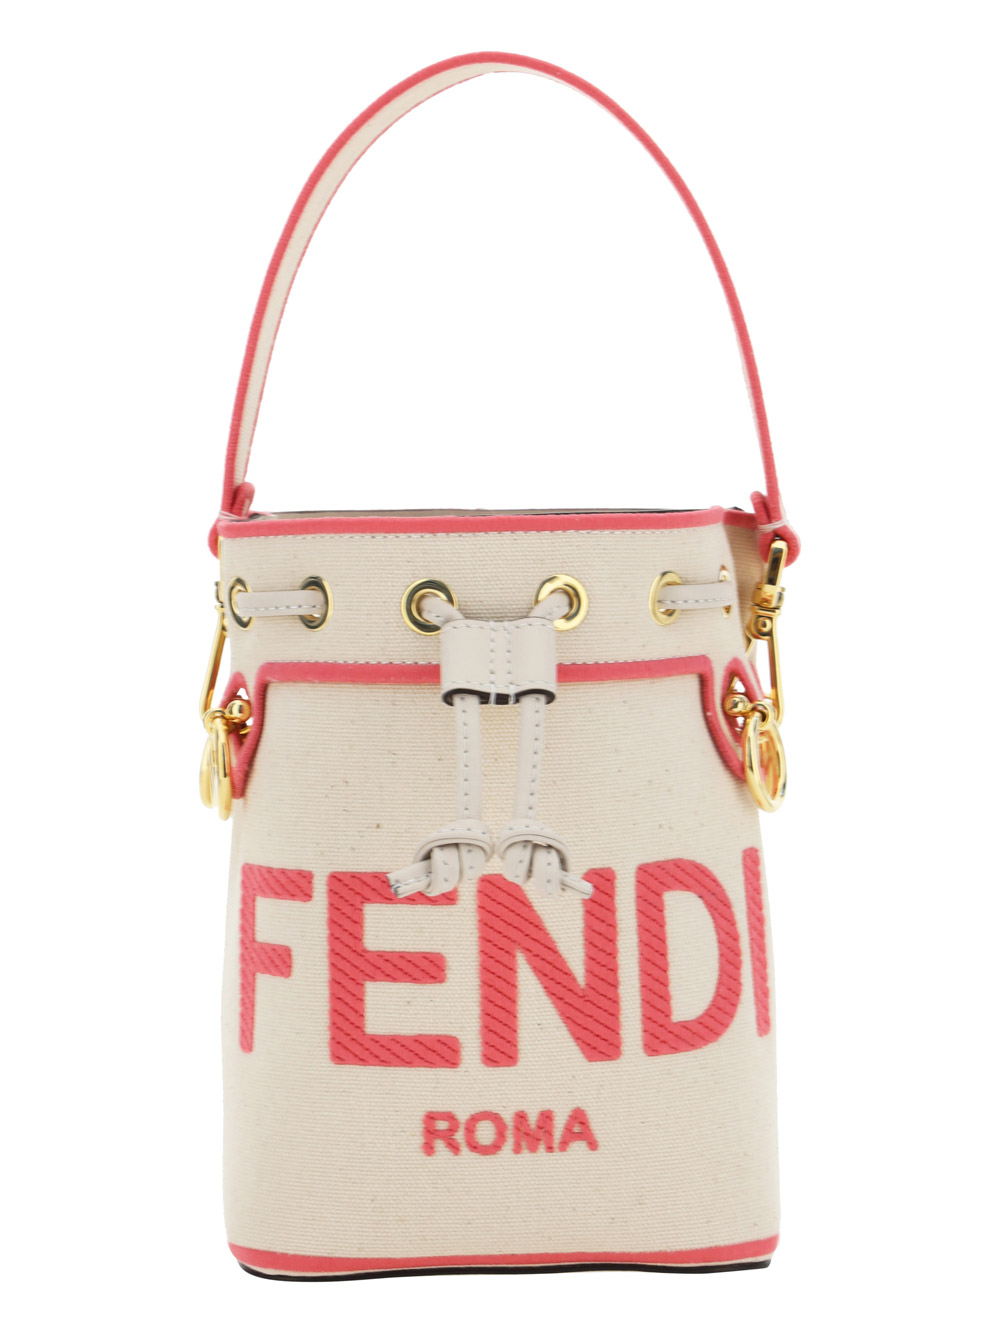 Fendi Leather Bucket Bags Are Trendy But Timeless